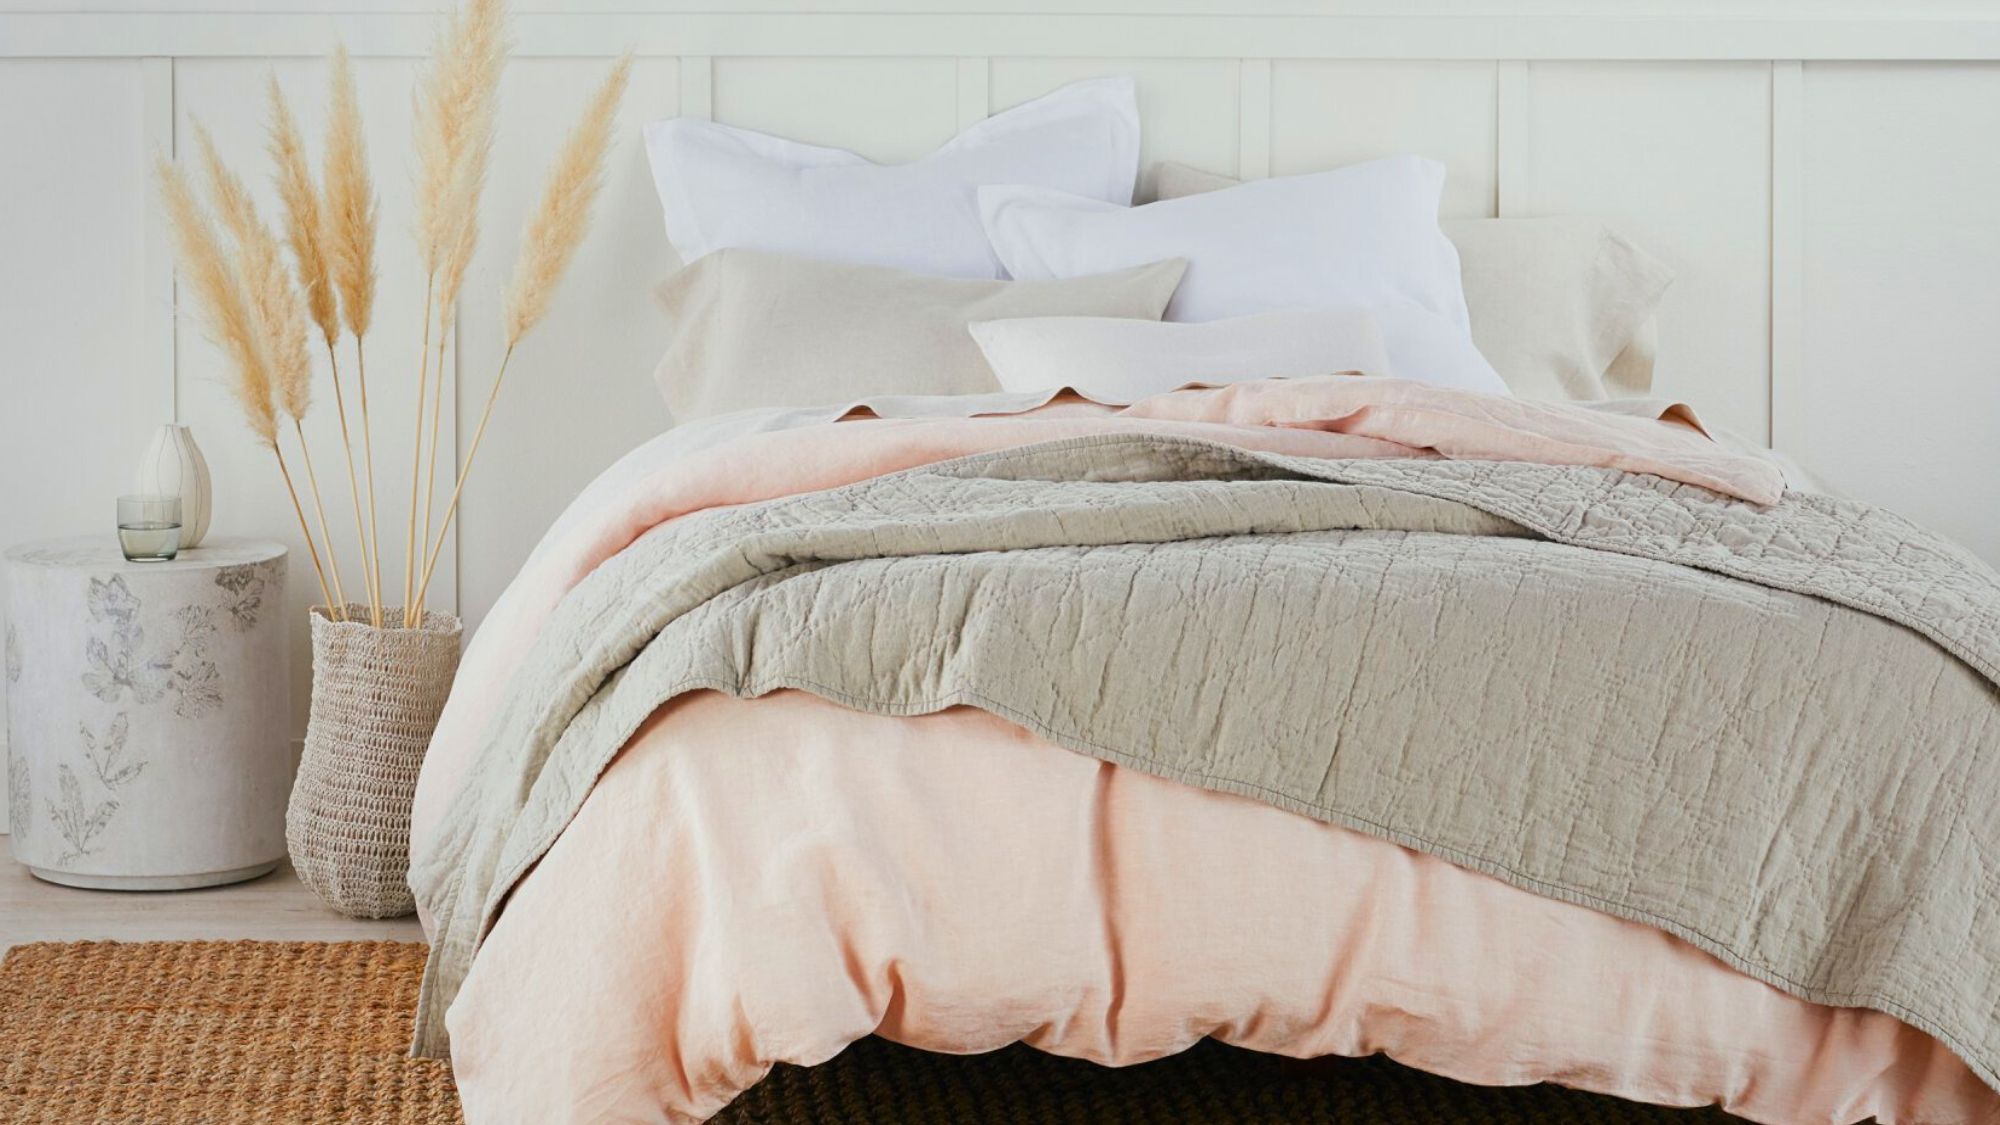 A cozy winter bedding with a pink and gray comforter and pillows, creating a warm and inviting atmosphere